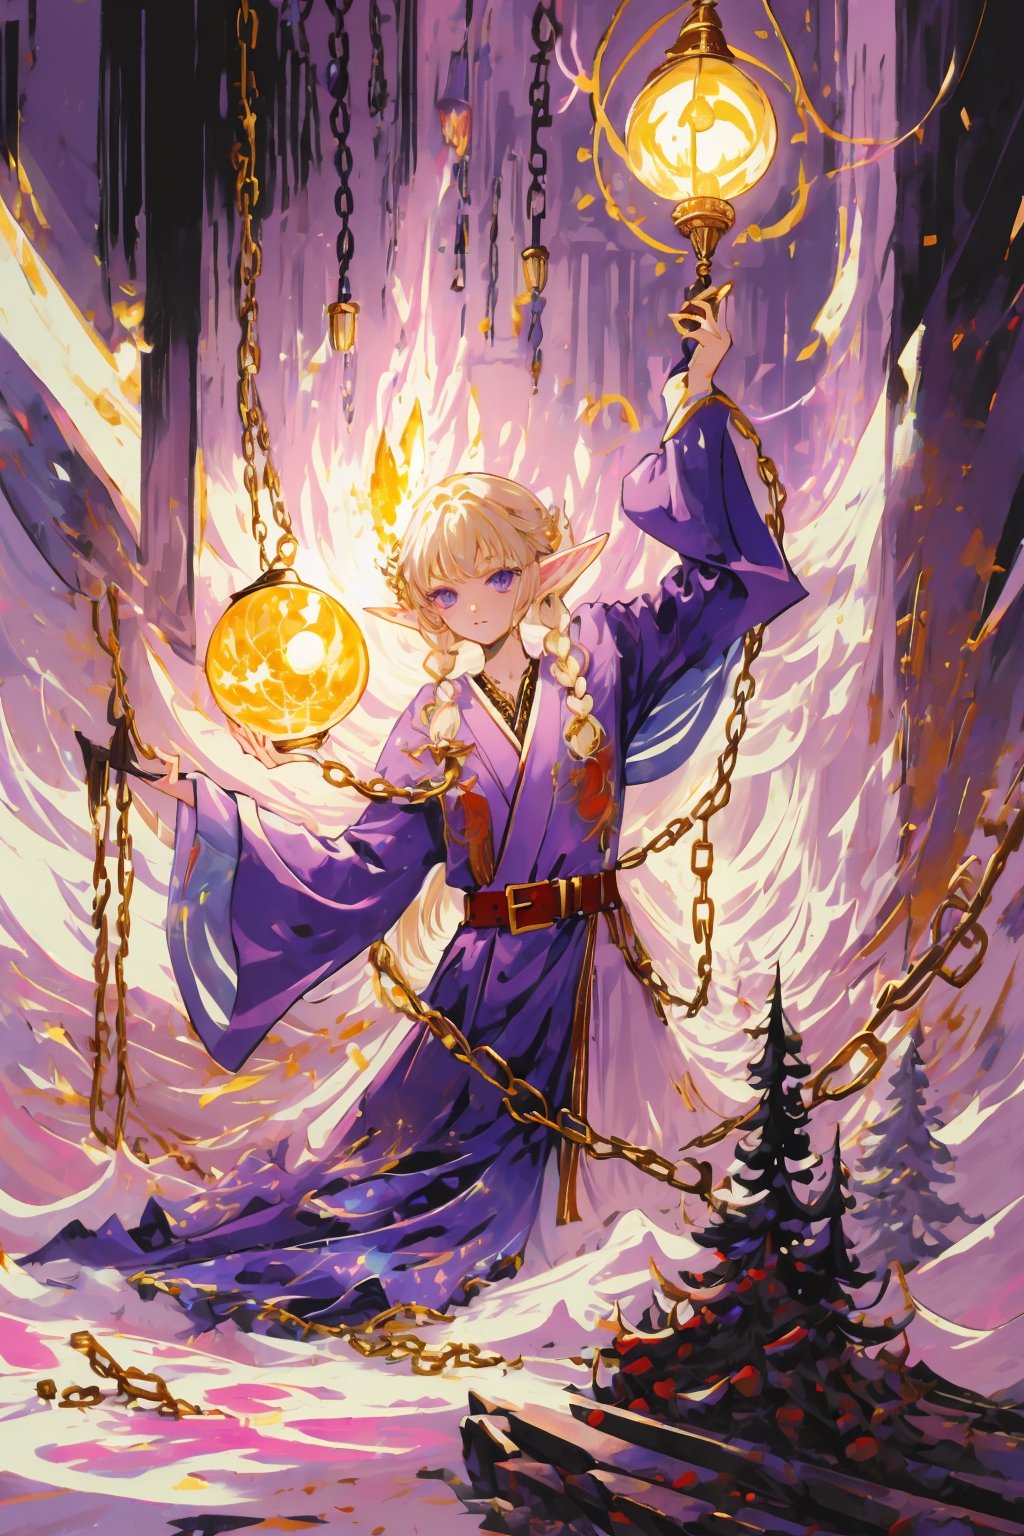 detailed anime style, beautiful and stunning artwork, purple clothes, shimmering shadows, strong colors, candy cotton pastel colors, young girl, tsundere, young elf girl, golden baculum, light blonde straight voluminous hair with braids and accessories, long hair, purple eyes, side leak robes. pink cloth details. magic gadgets, orbs, lamps, poles, lampshade, ornate background with white and pink lights, purple front robes with pink details, side of the body shown, side nudity, arms shown, golden belt, chain details, sorcerer, conjuring magic, by Yoshitaka Amano, CLAMP, Dungeons and Dragons, acrylic art, pastel colors, holding a magic fireball, fireball, magic,ink,fantasy00d,monochrome,amano yoshitaka,DonMDj1nnM4g1cXL ,Fantasy